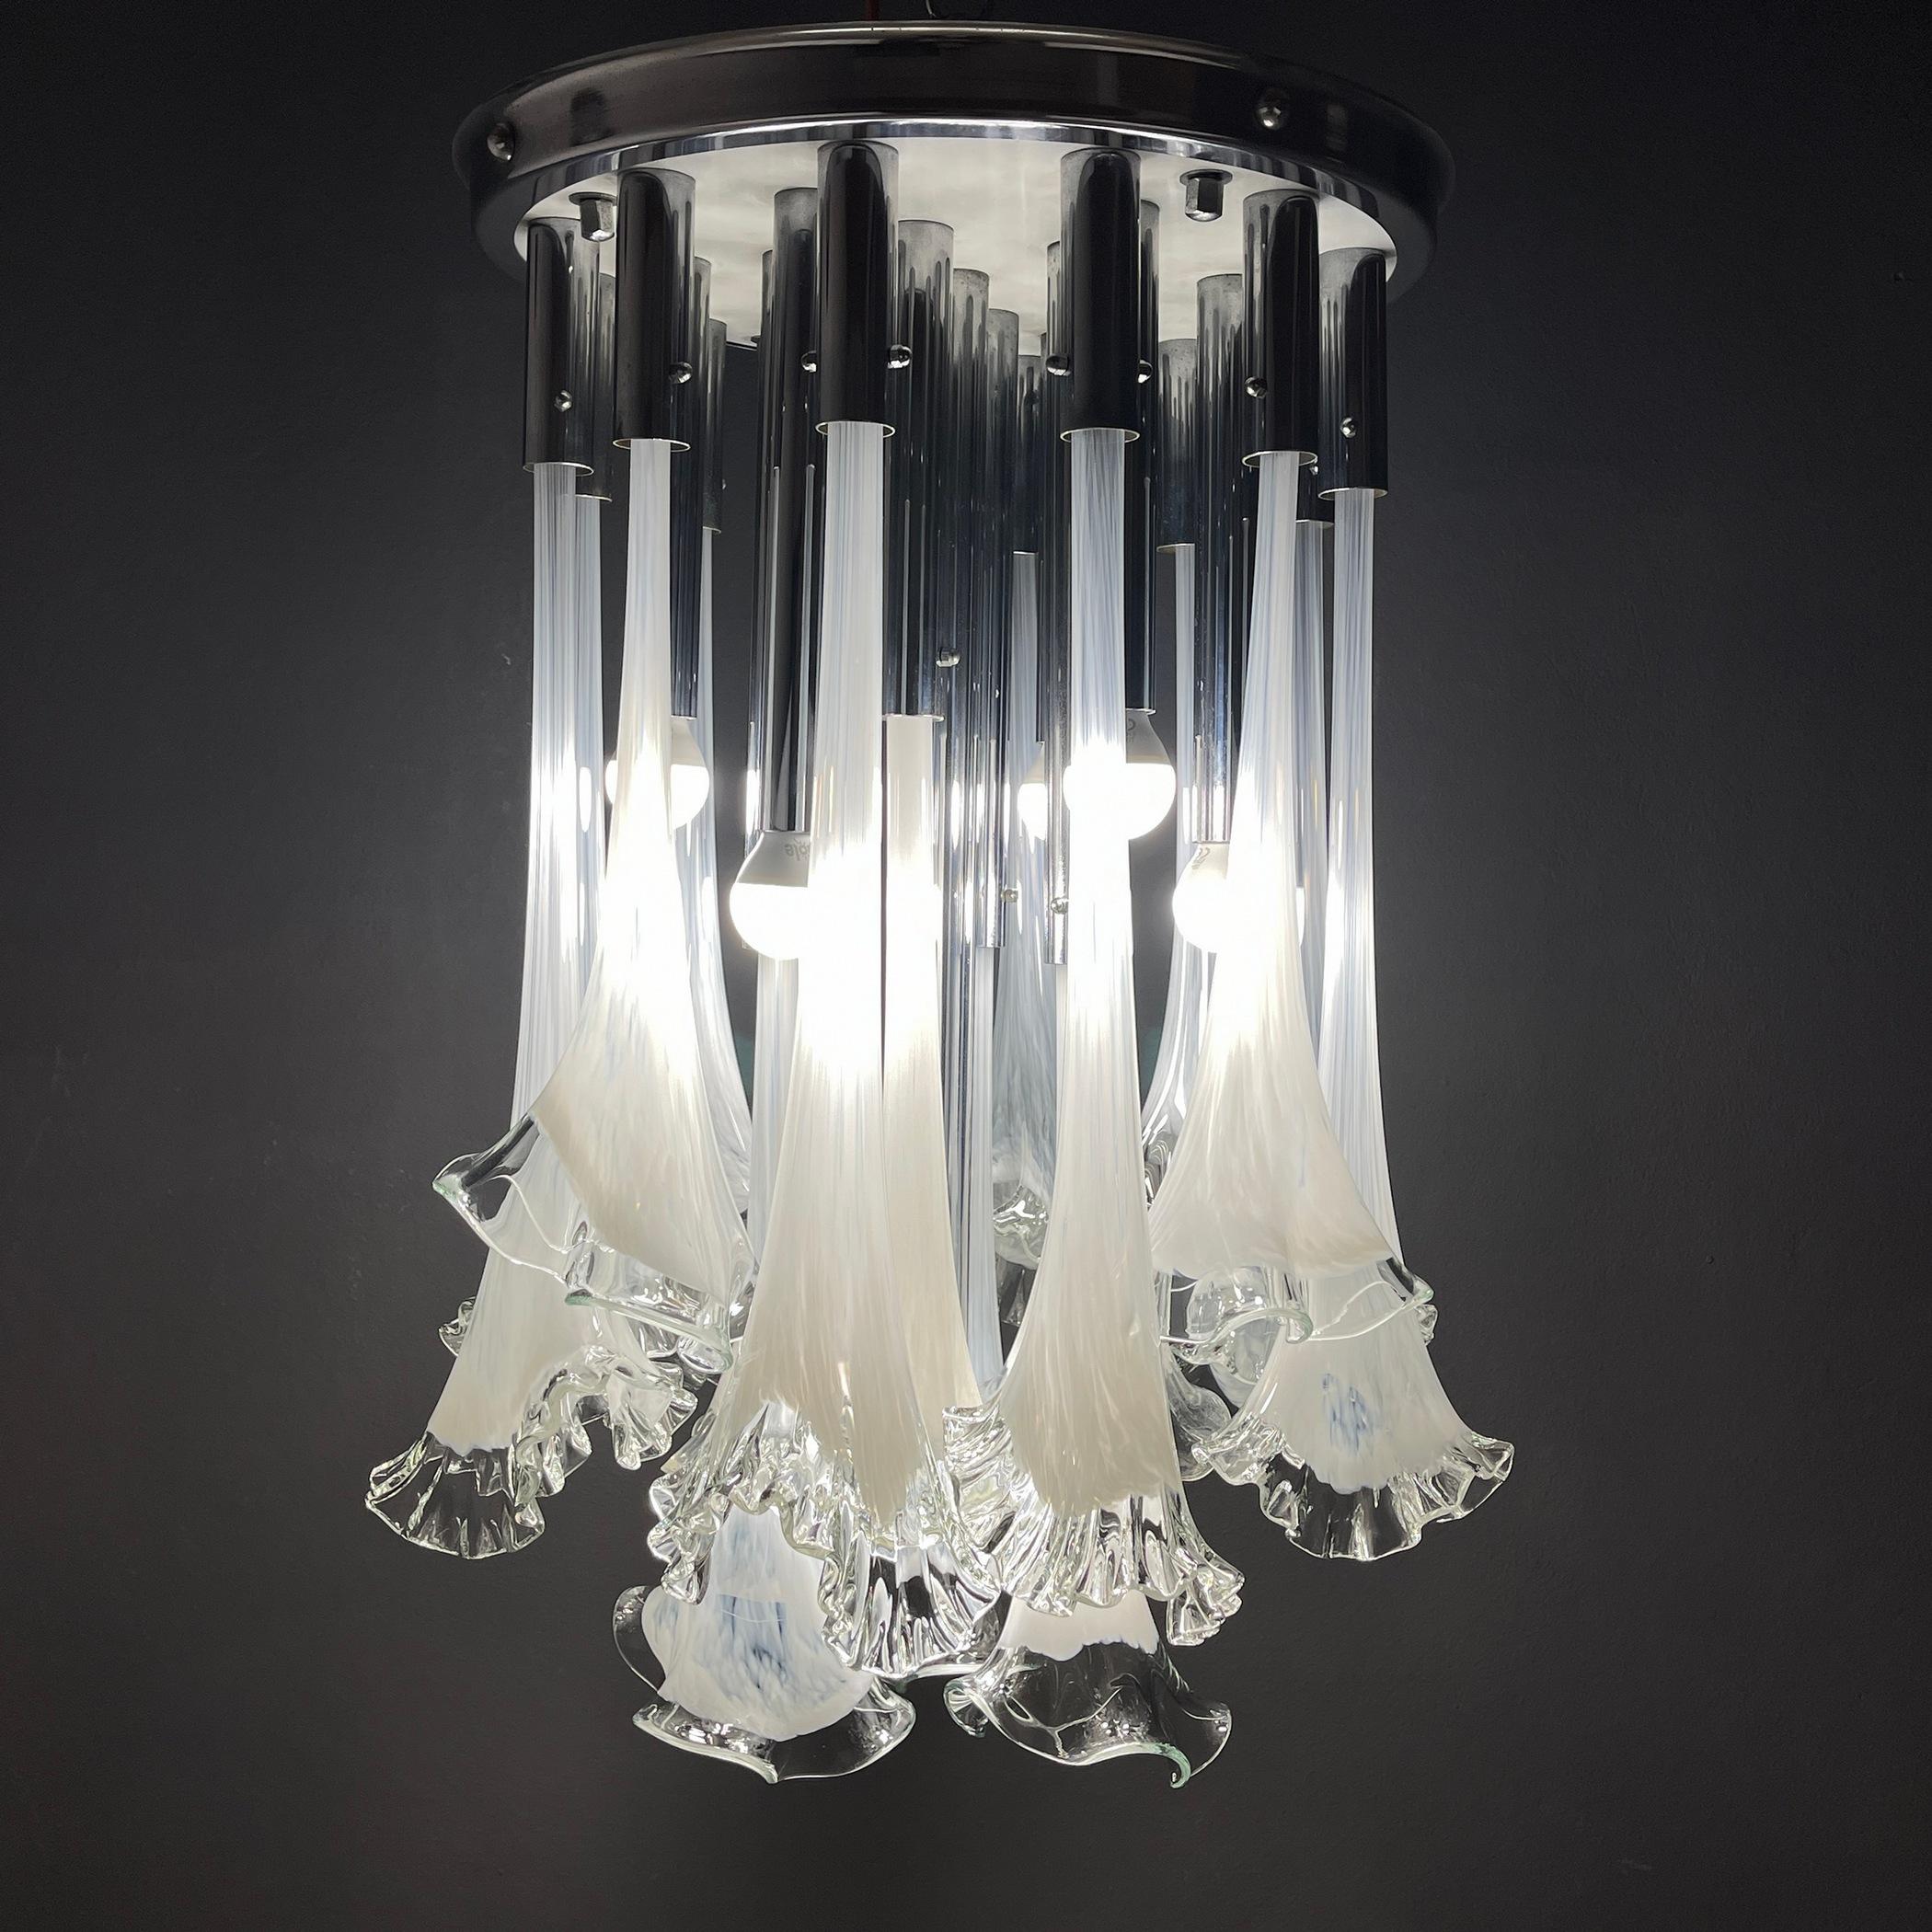 The unique Murano chandelier Calla or Lily by Venini was made in Italy in the 1960s. Beautiful chandelier with glass flowers that seem to fall from a chrome stand. This lamp with its extraordinary design is a highlight for any lounge interior.